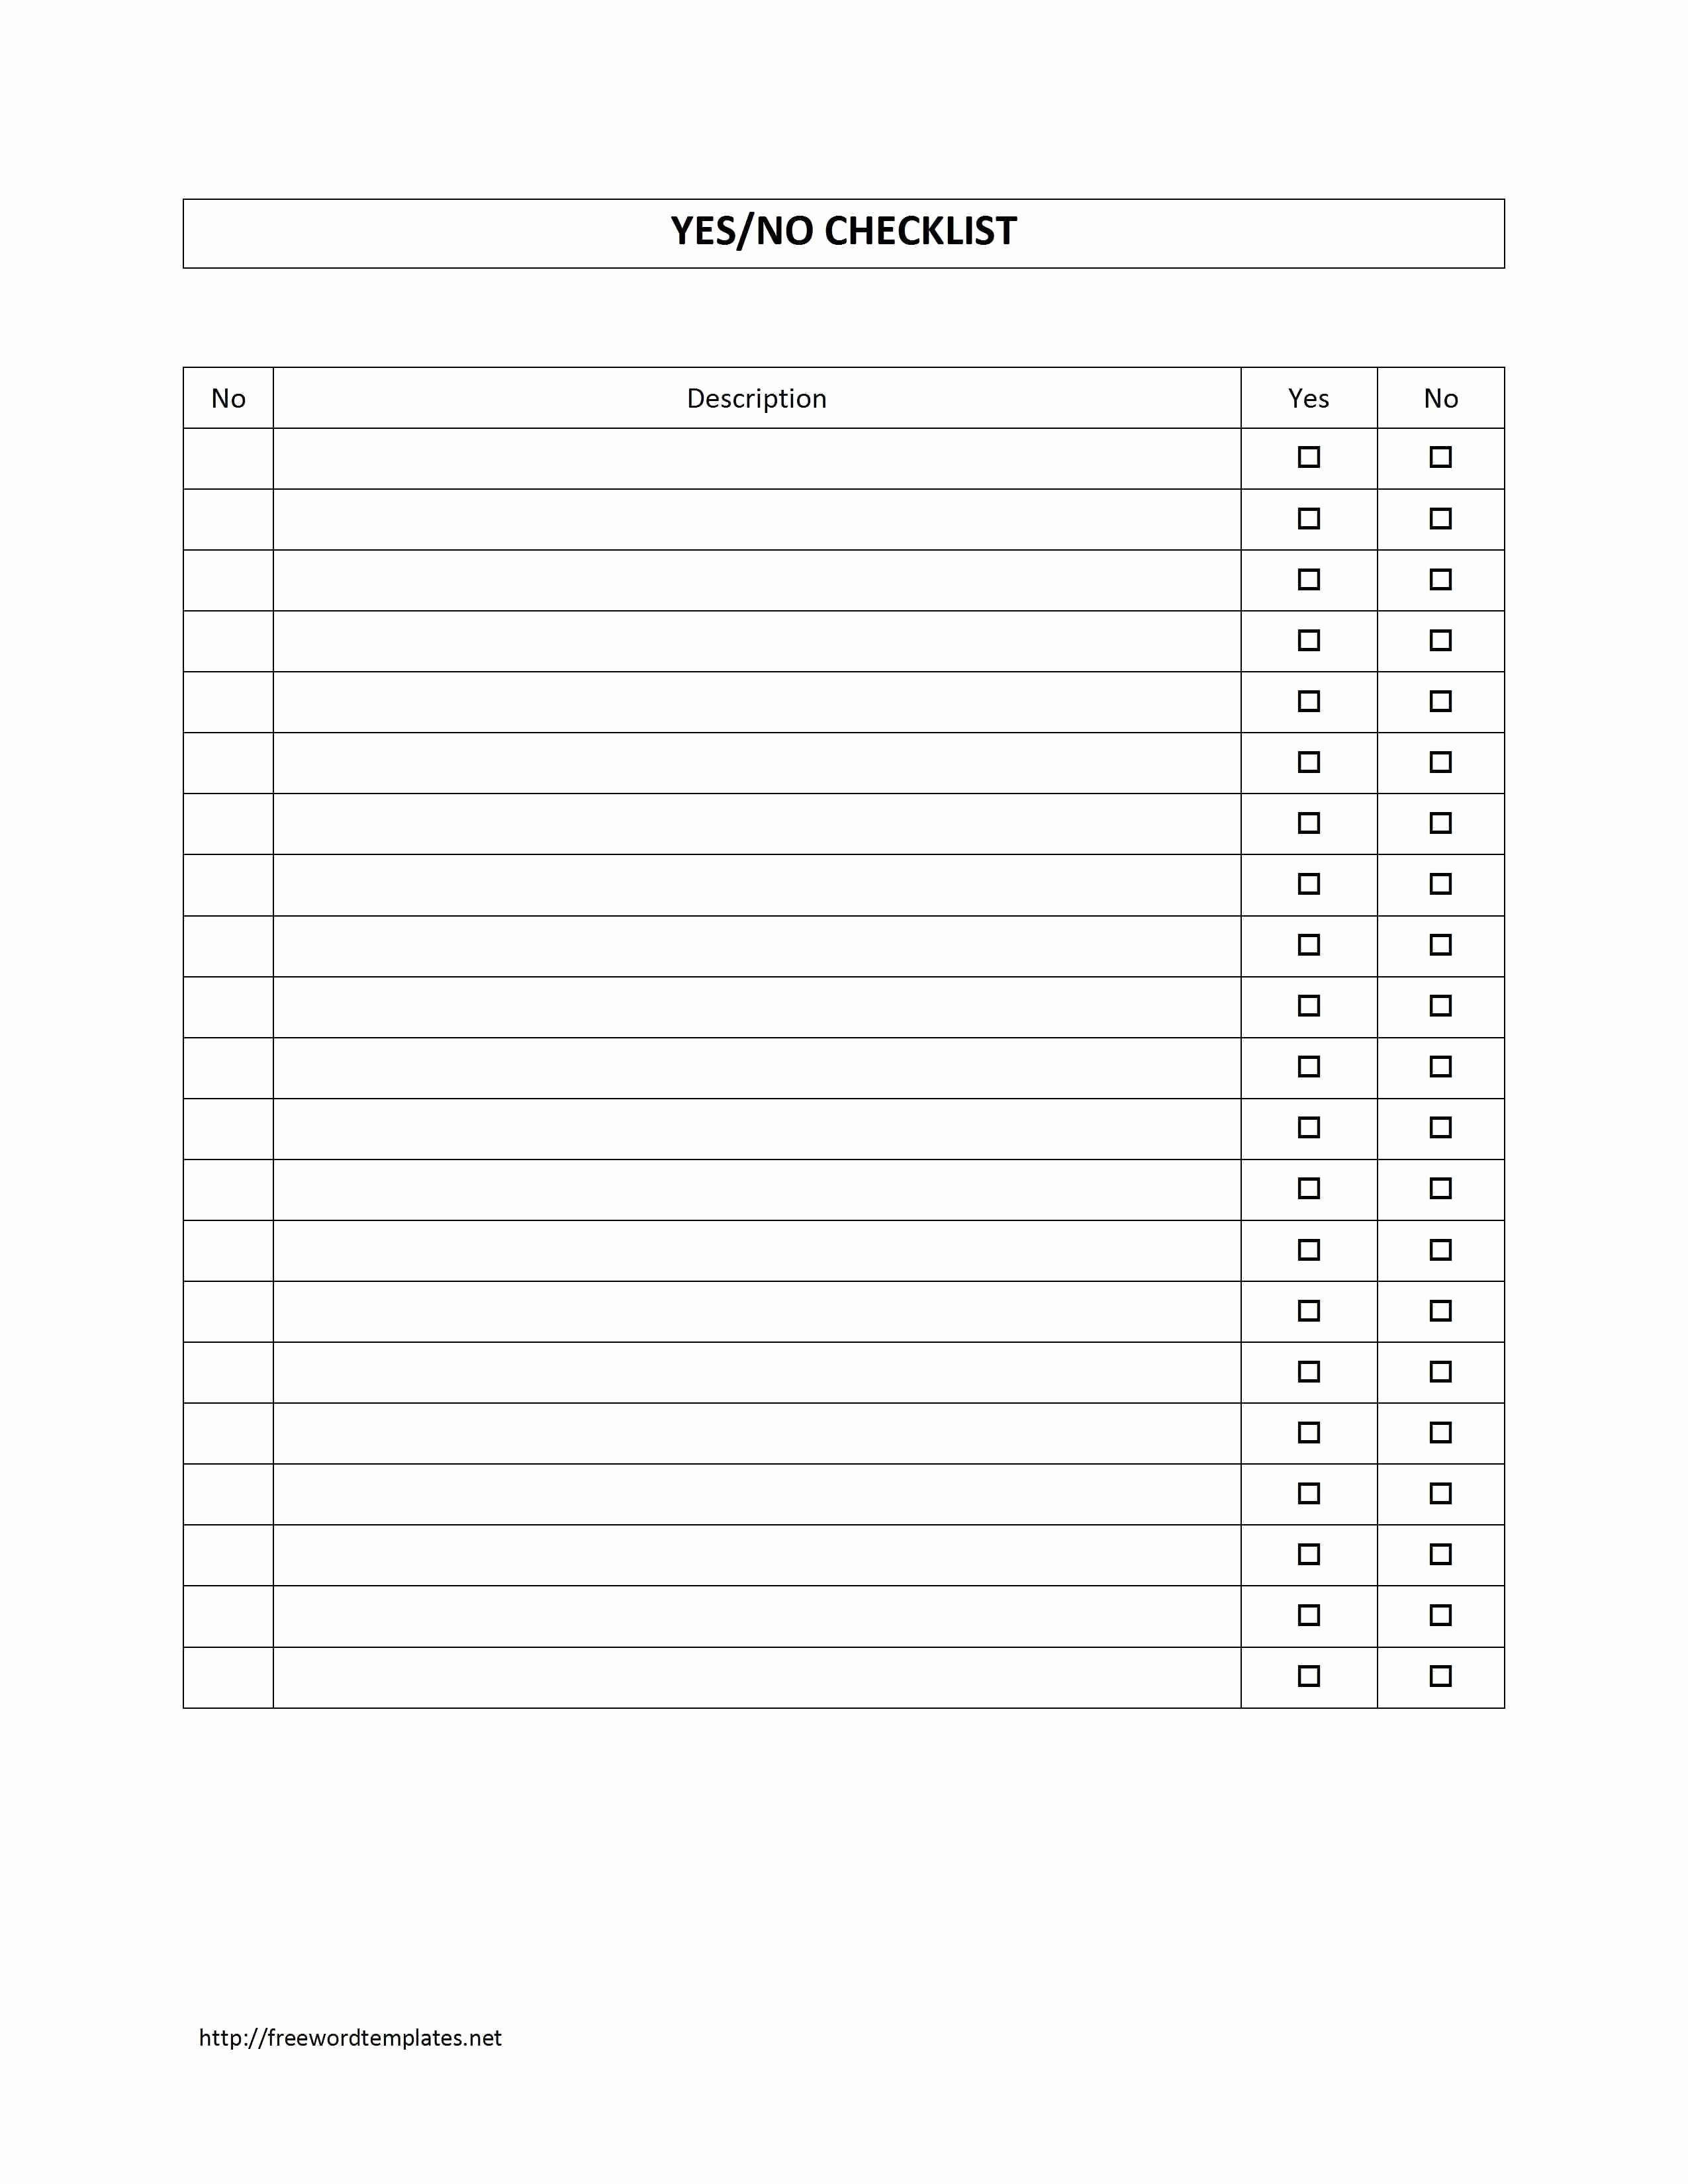 Editable Checklist Template Word Beautiful Survey Sheet with Yes No Checklist Template